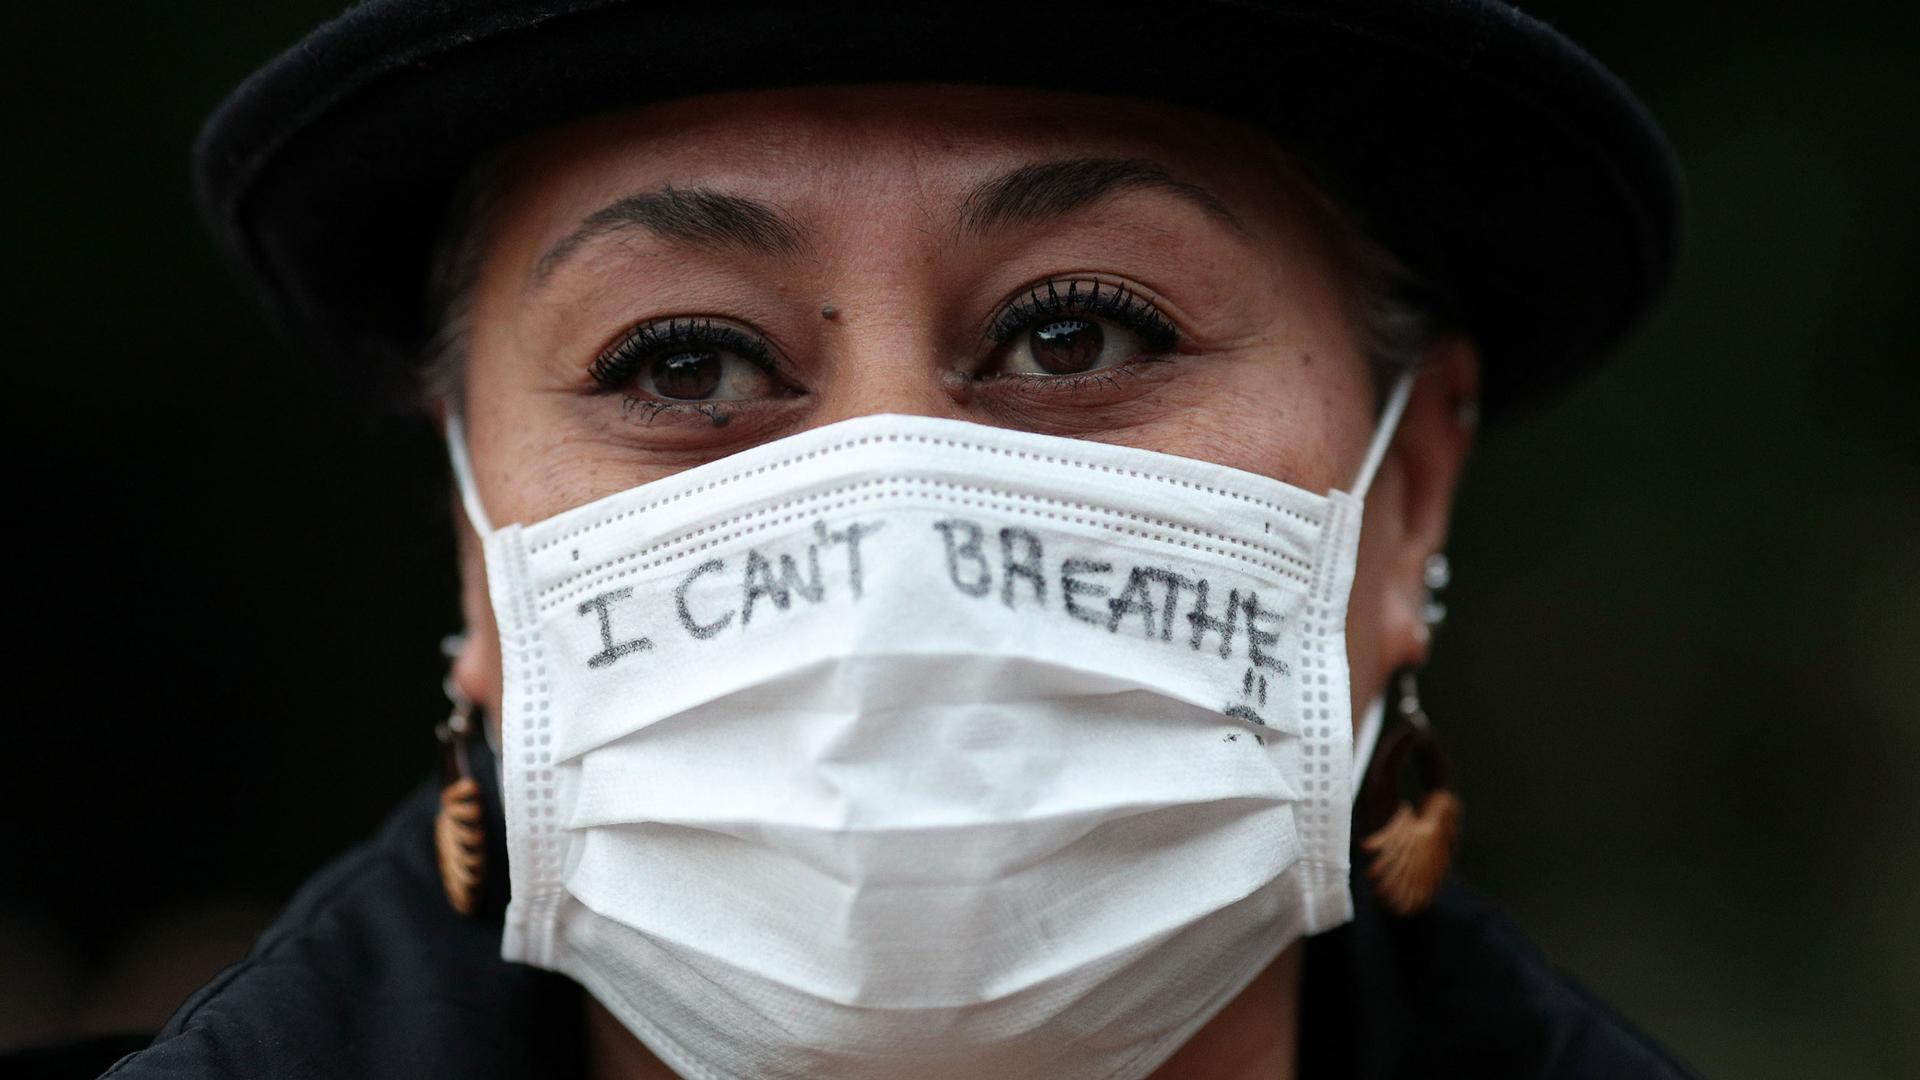 A close up photograph of a woman wearing a white protective face mask with the words, "I can't breathe" written on it.